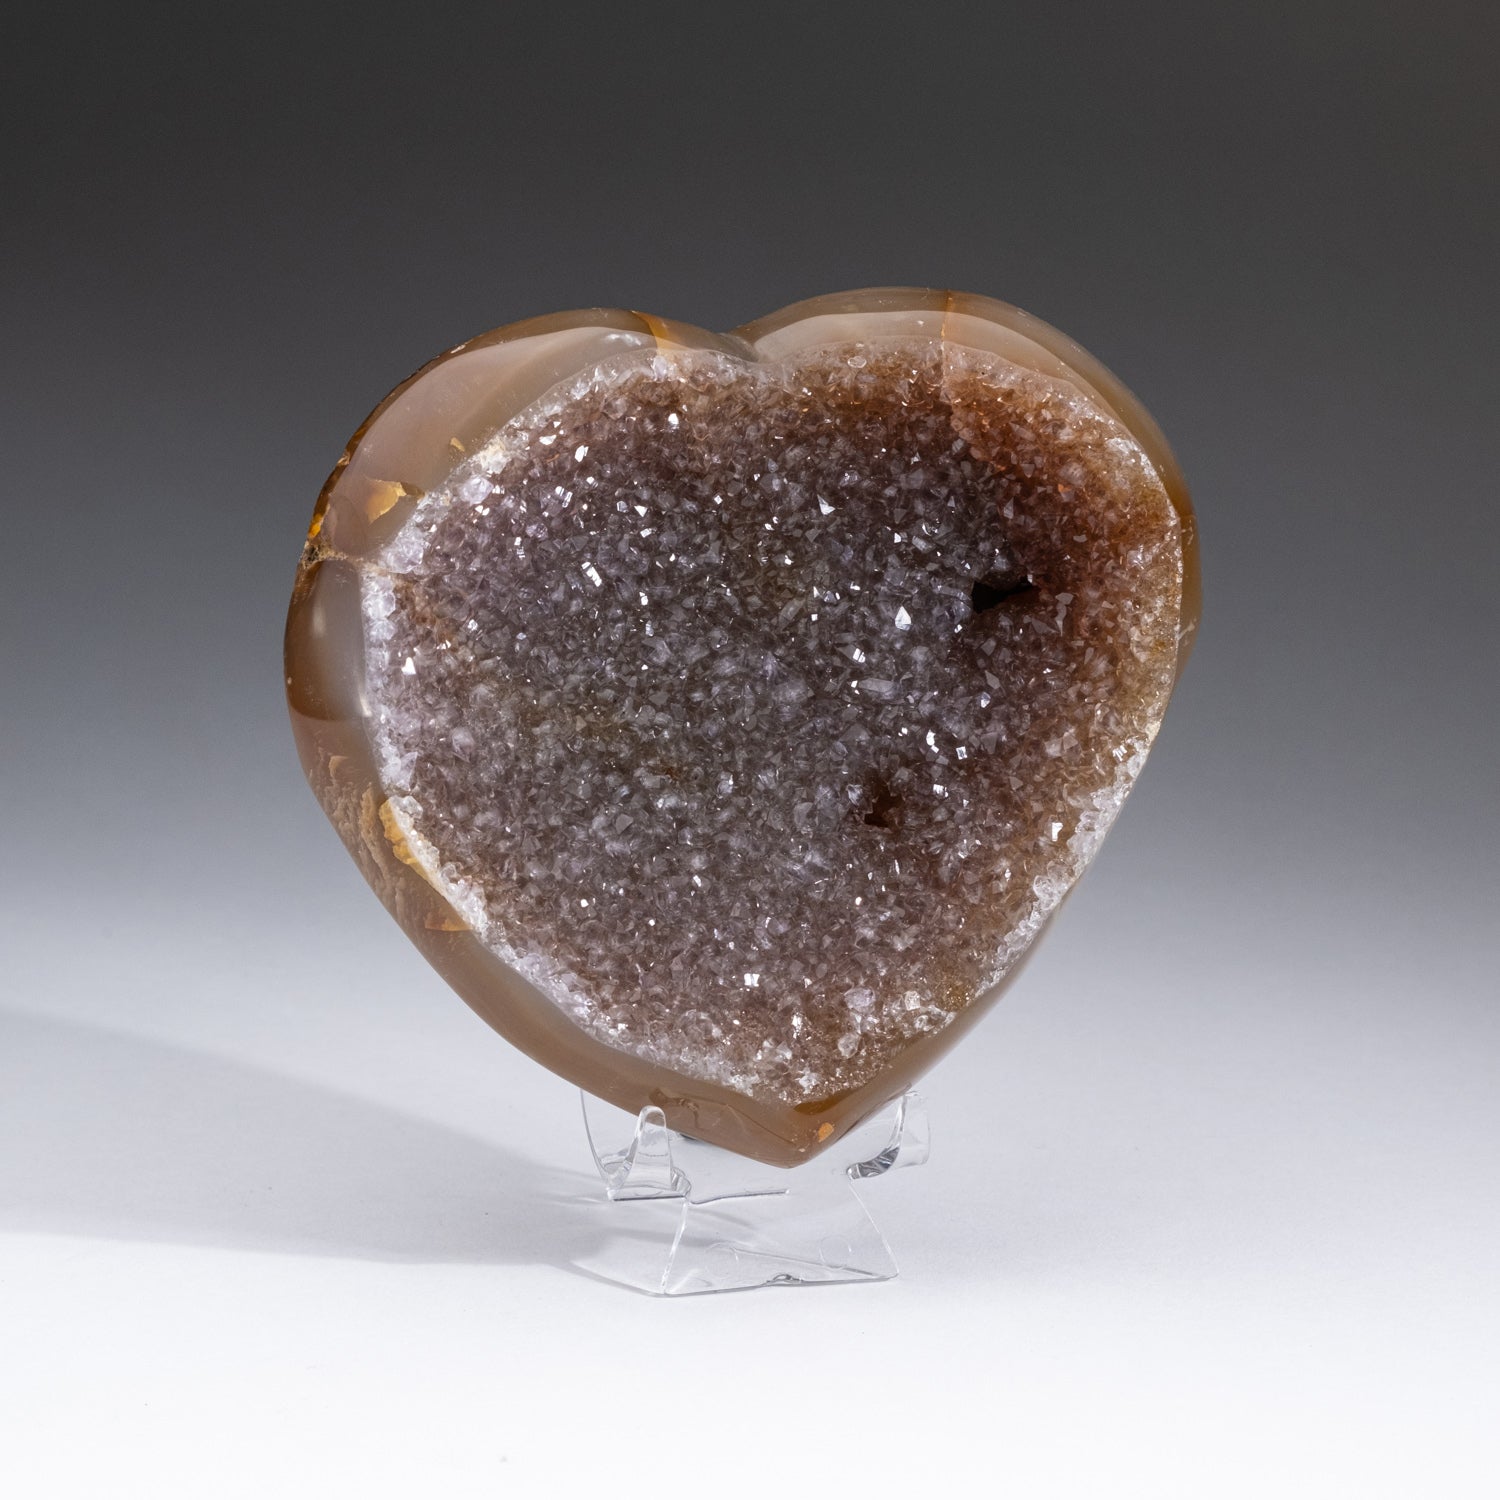 Genuine Agate with Quartz Crystal Heart from Brazil (1.4 lbs)